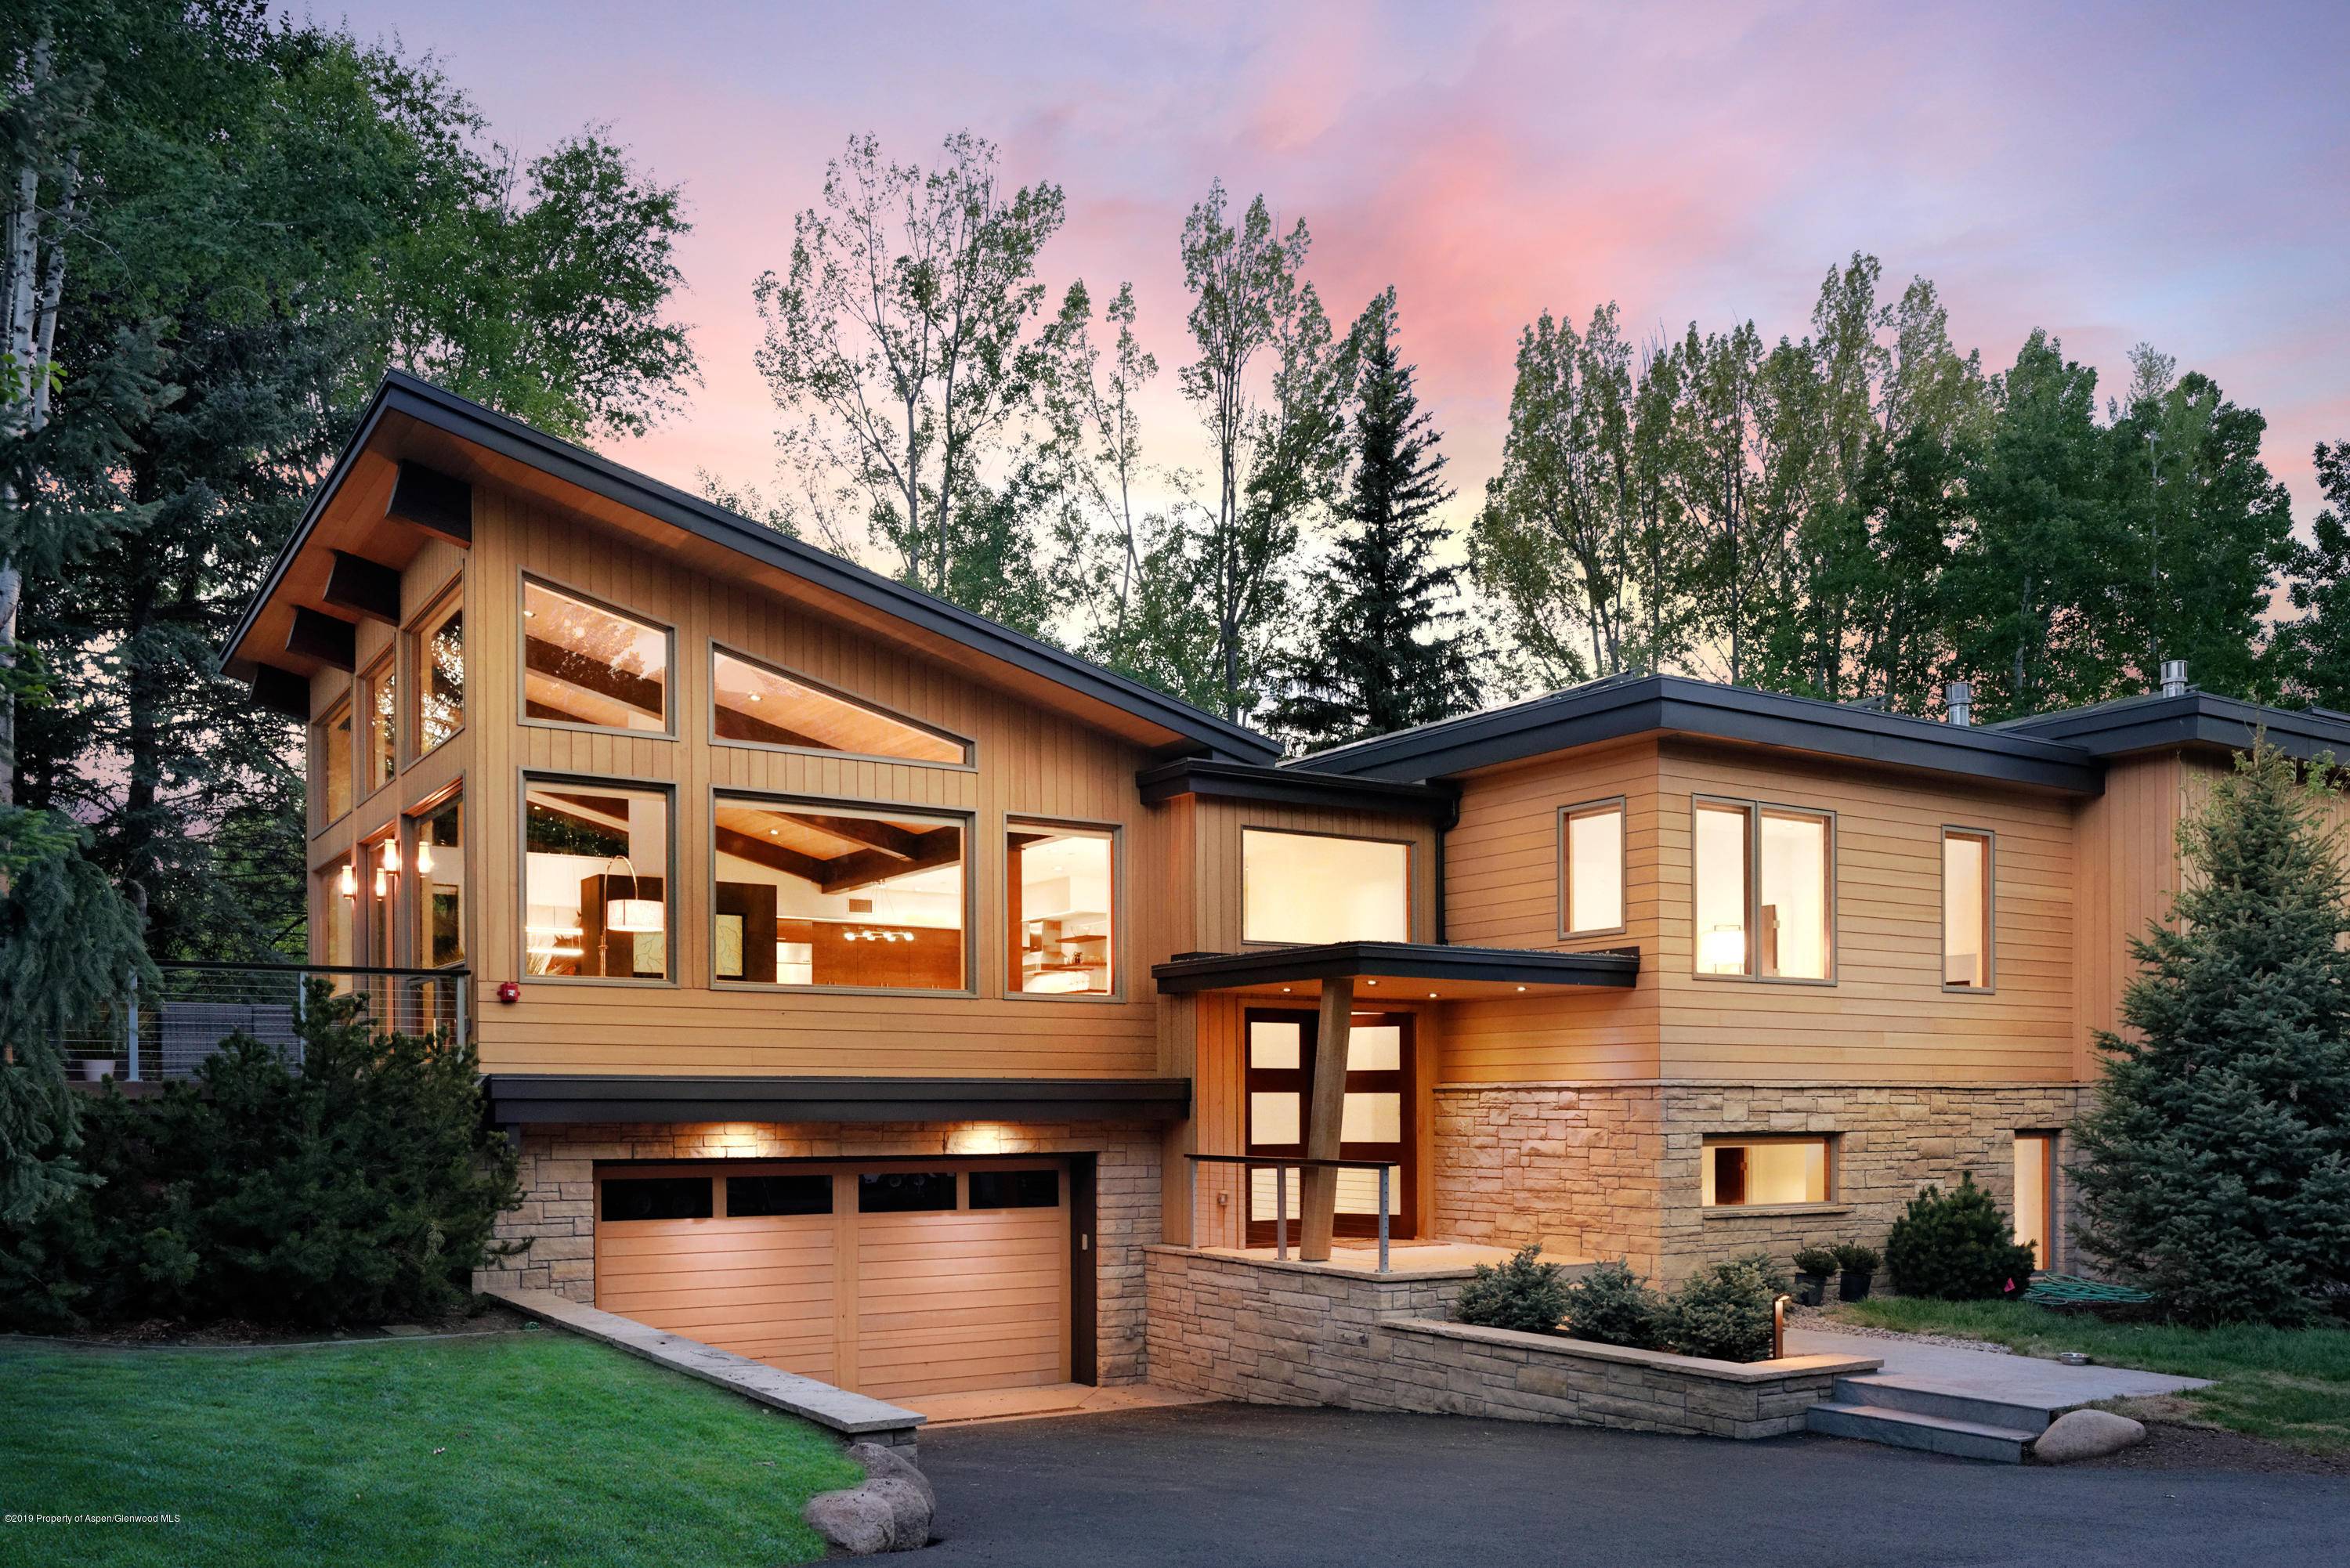 Luxurious mountain contemporary is the perfect way to describe this newly built Aspen Home.